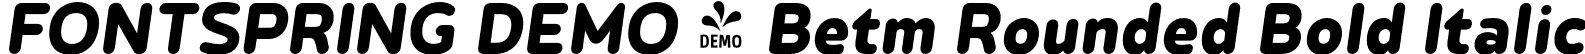 FONTSPRING DEMO - Betm Rounded Bold Italic font - Fontspring-DEMO-betmrounded-bolditalic.otf